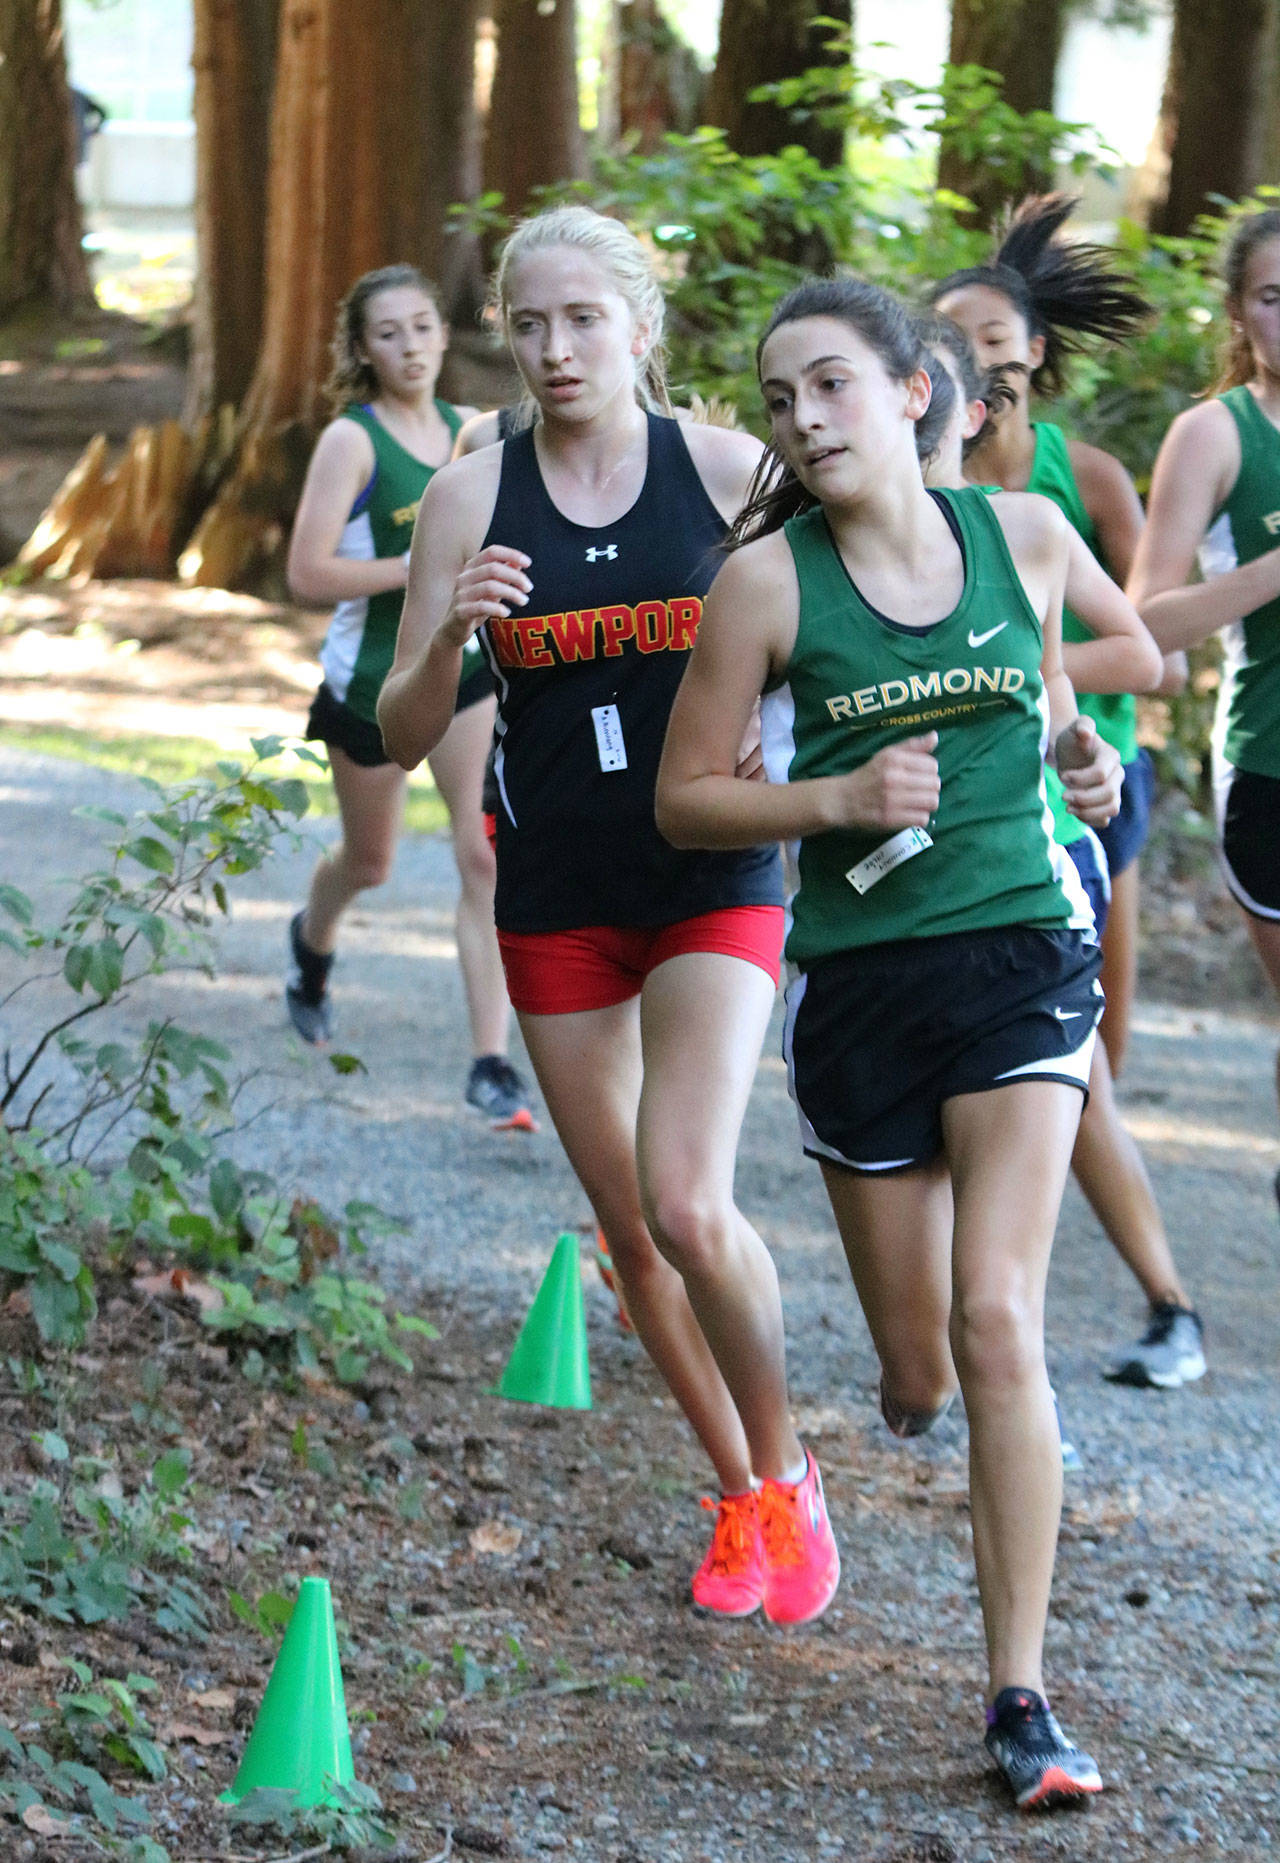 Redmond High sophomore Chloe Connolly, right, took second in 19 minutes, 50 seconds versus Newport and Woodinville. Newport senior Alyssa Bienfang, left, won the race in 19:49. Andy Nystrom / staff photo